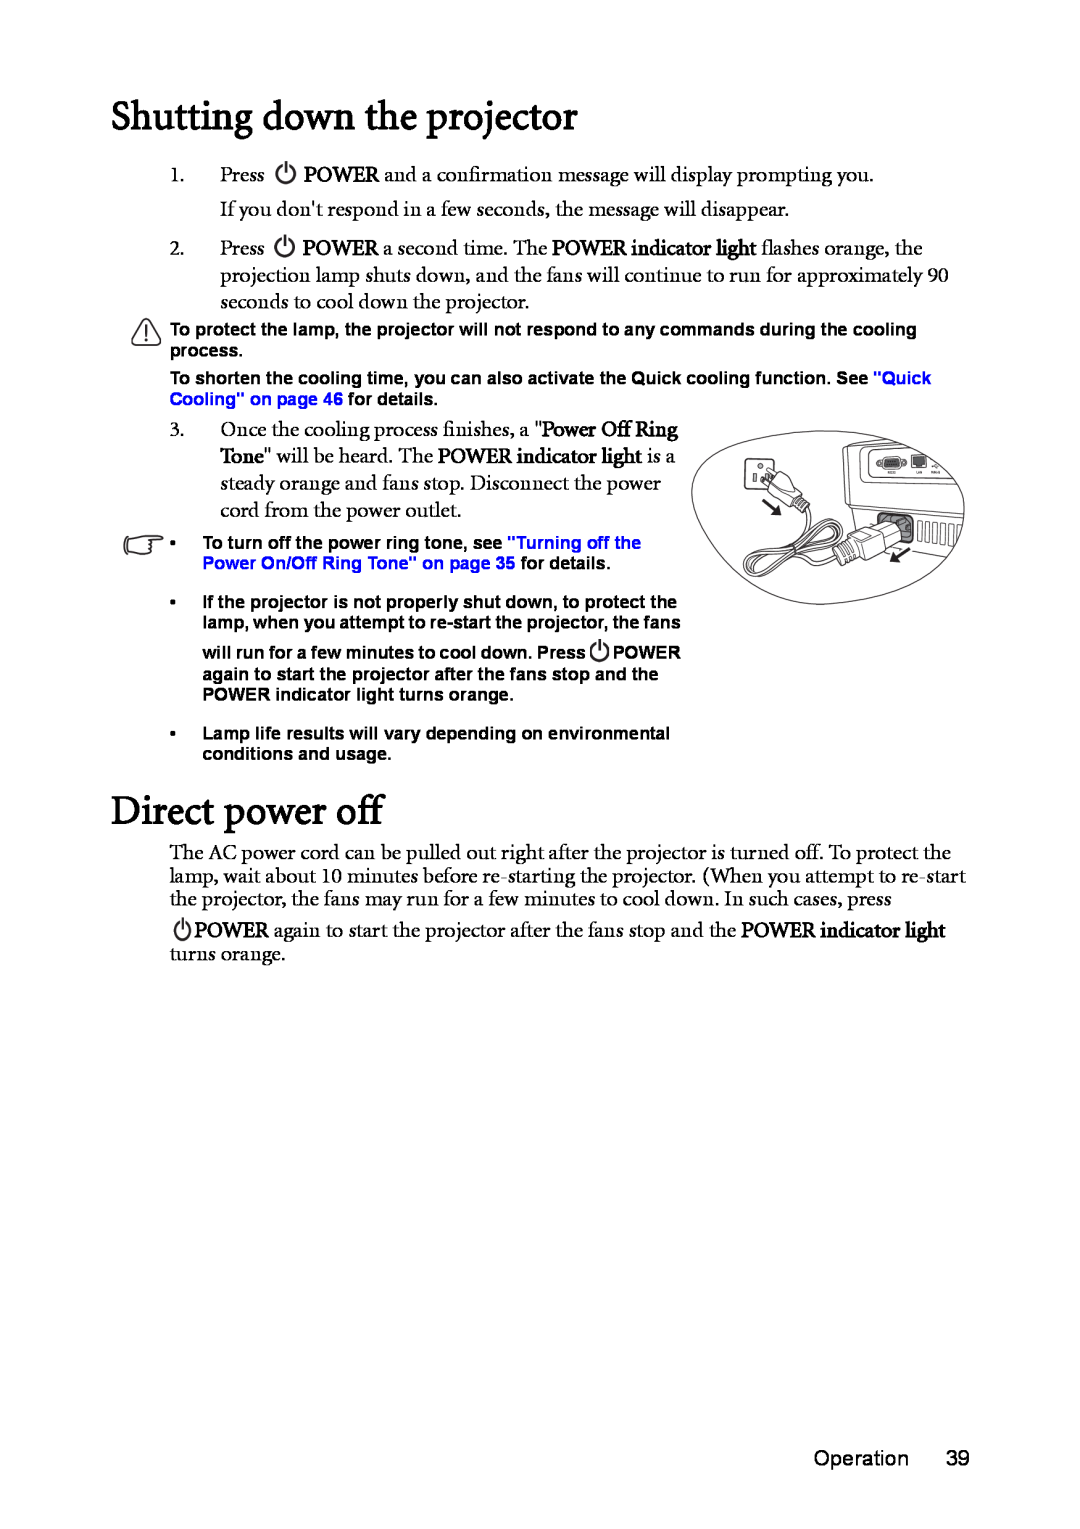 BenQ mw814st user manual Shutting down the projector, Direct power off 